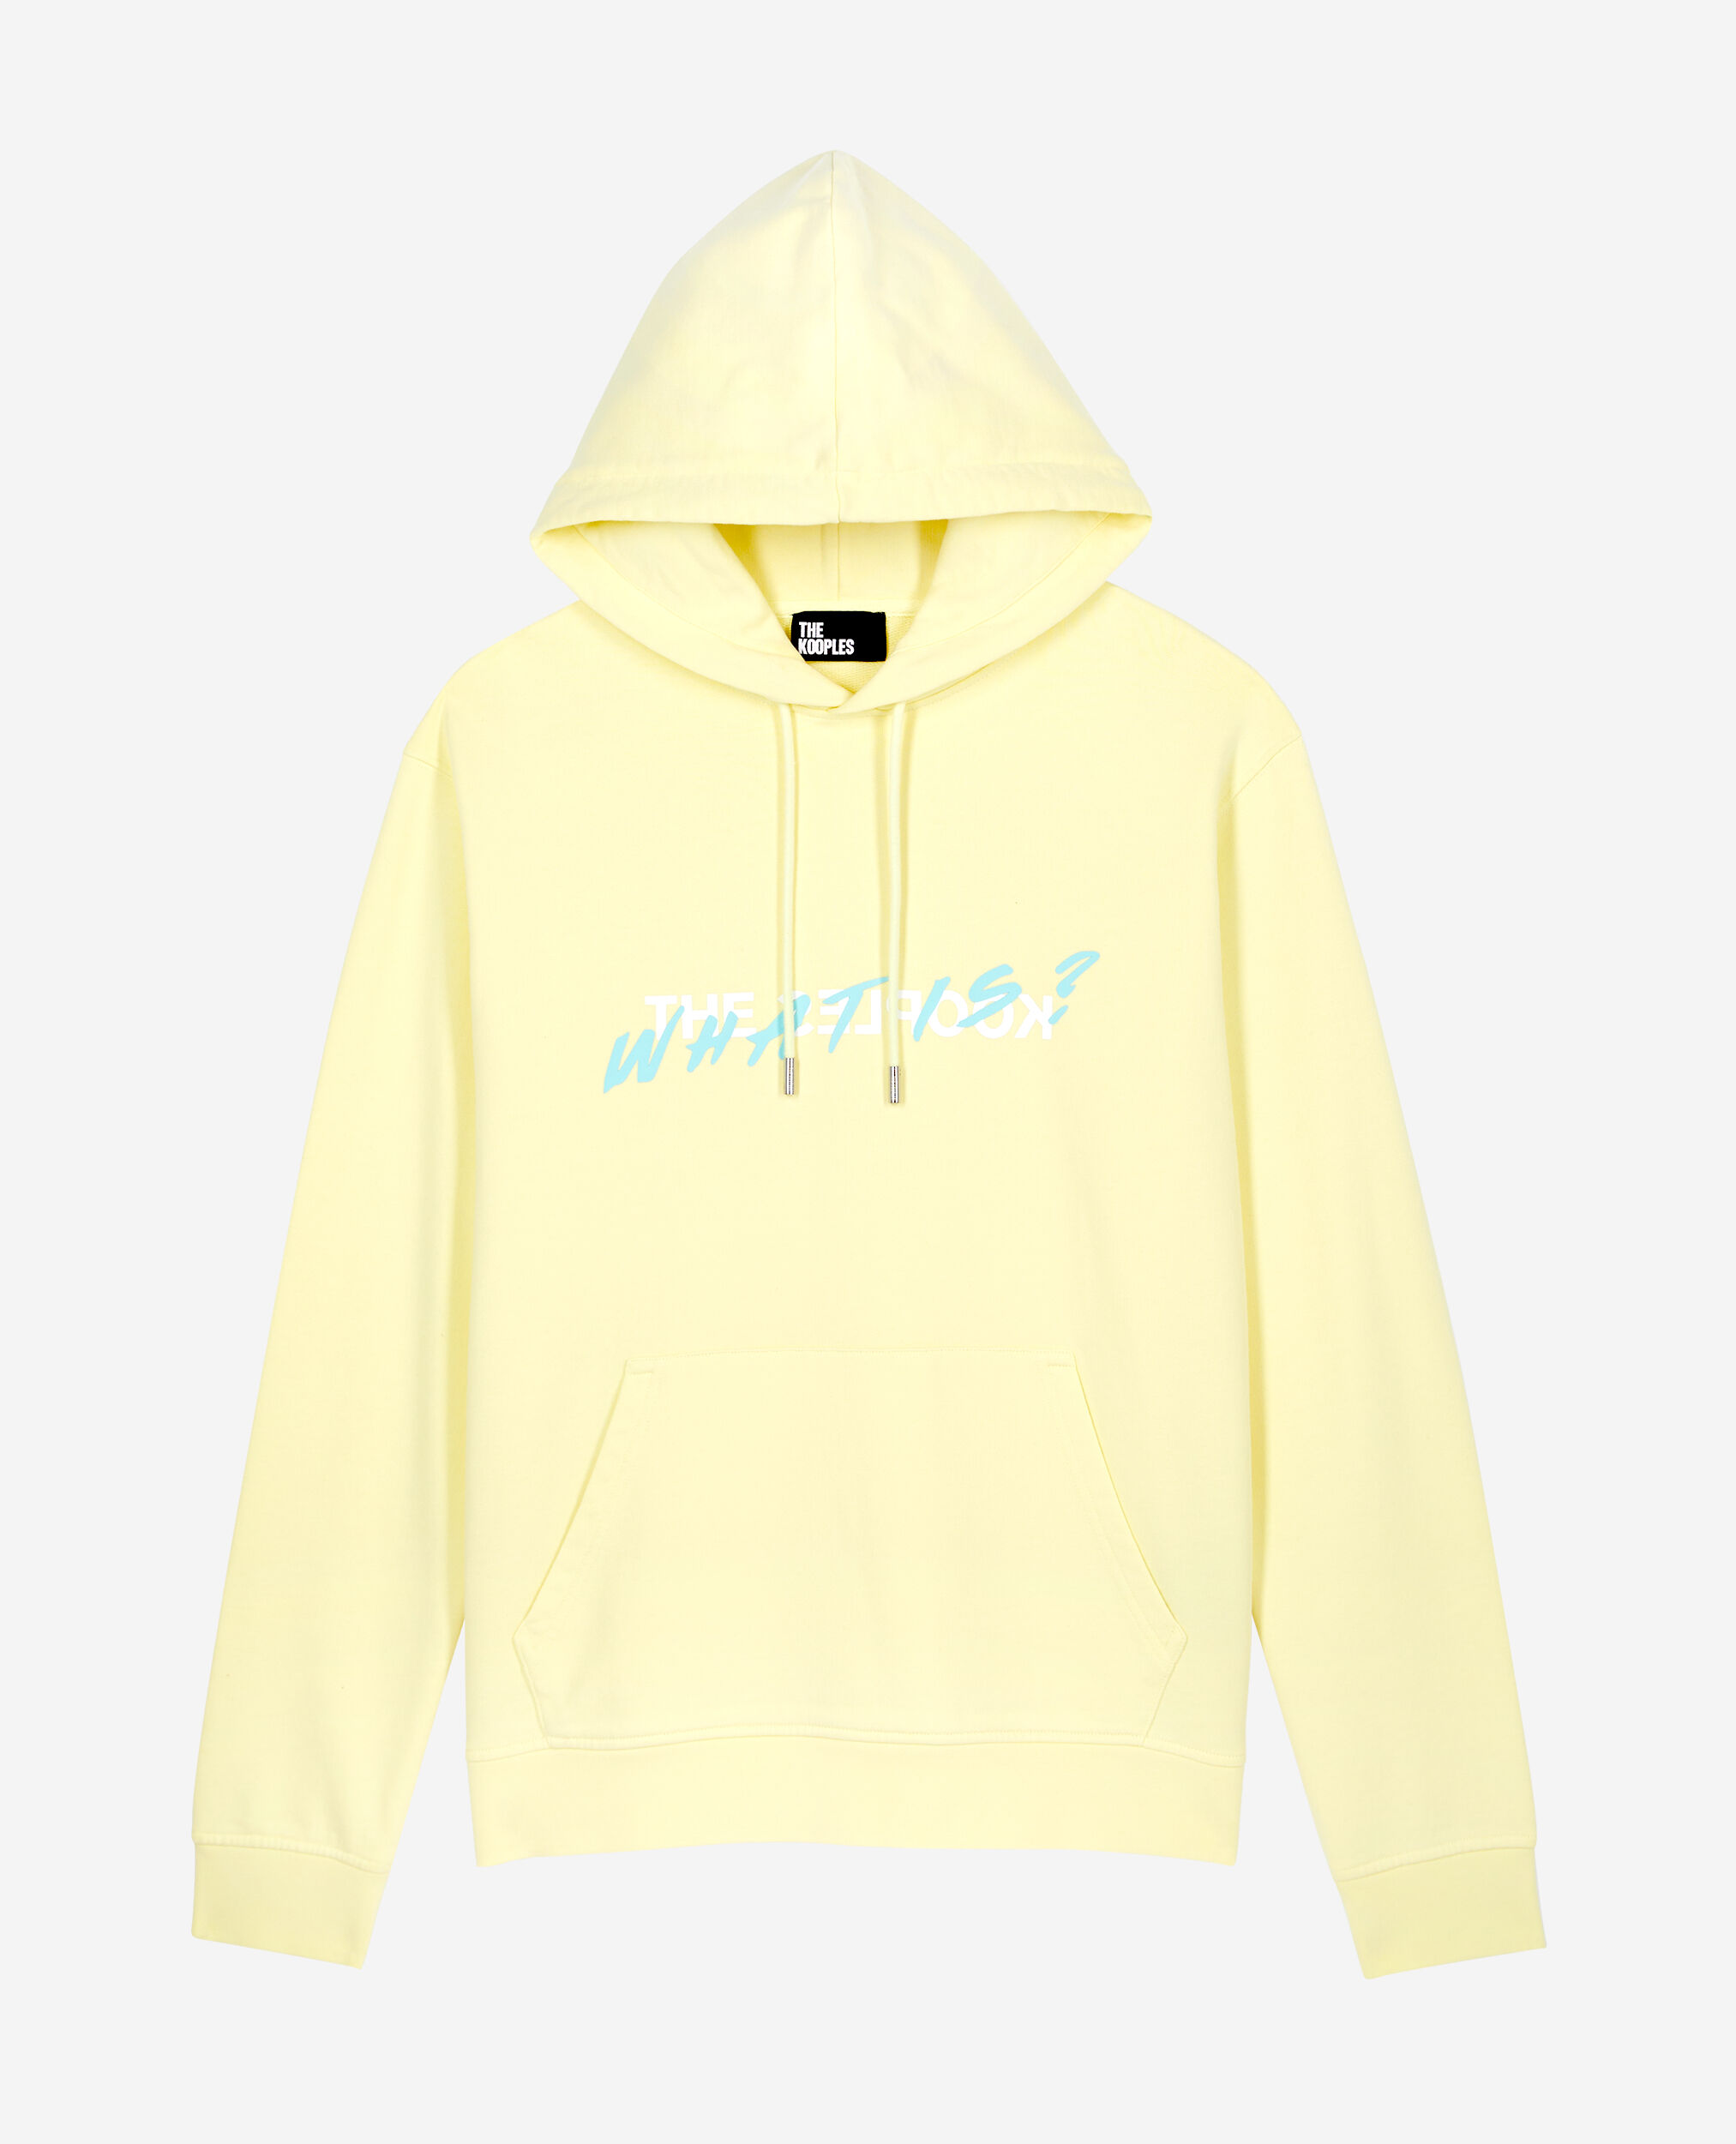 Sweatshirt à capuche What is jaune, BRIGHT YELLOW, hi-res image number null